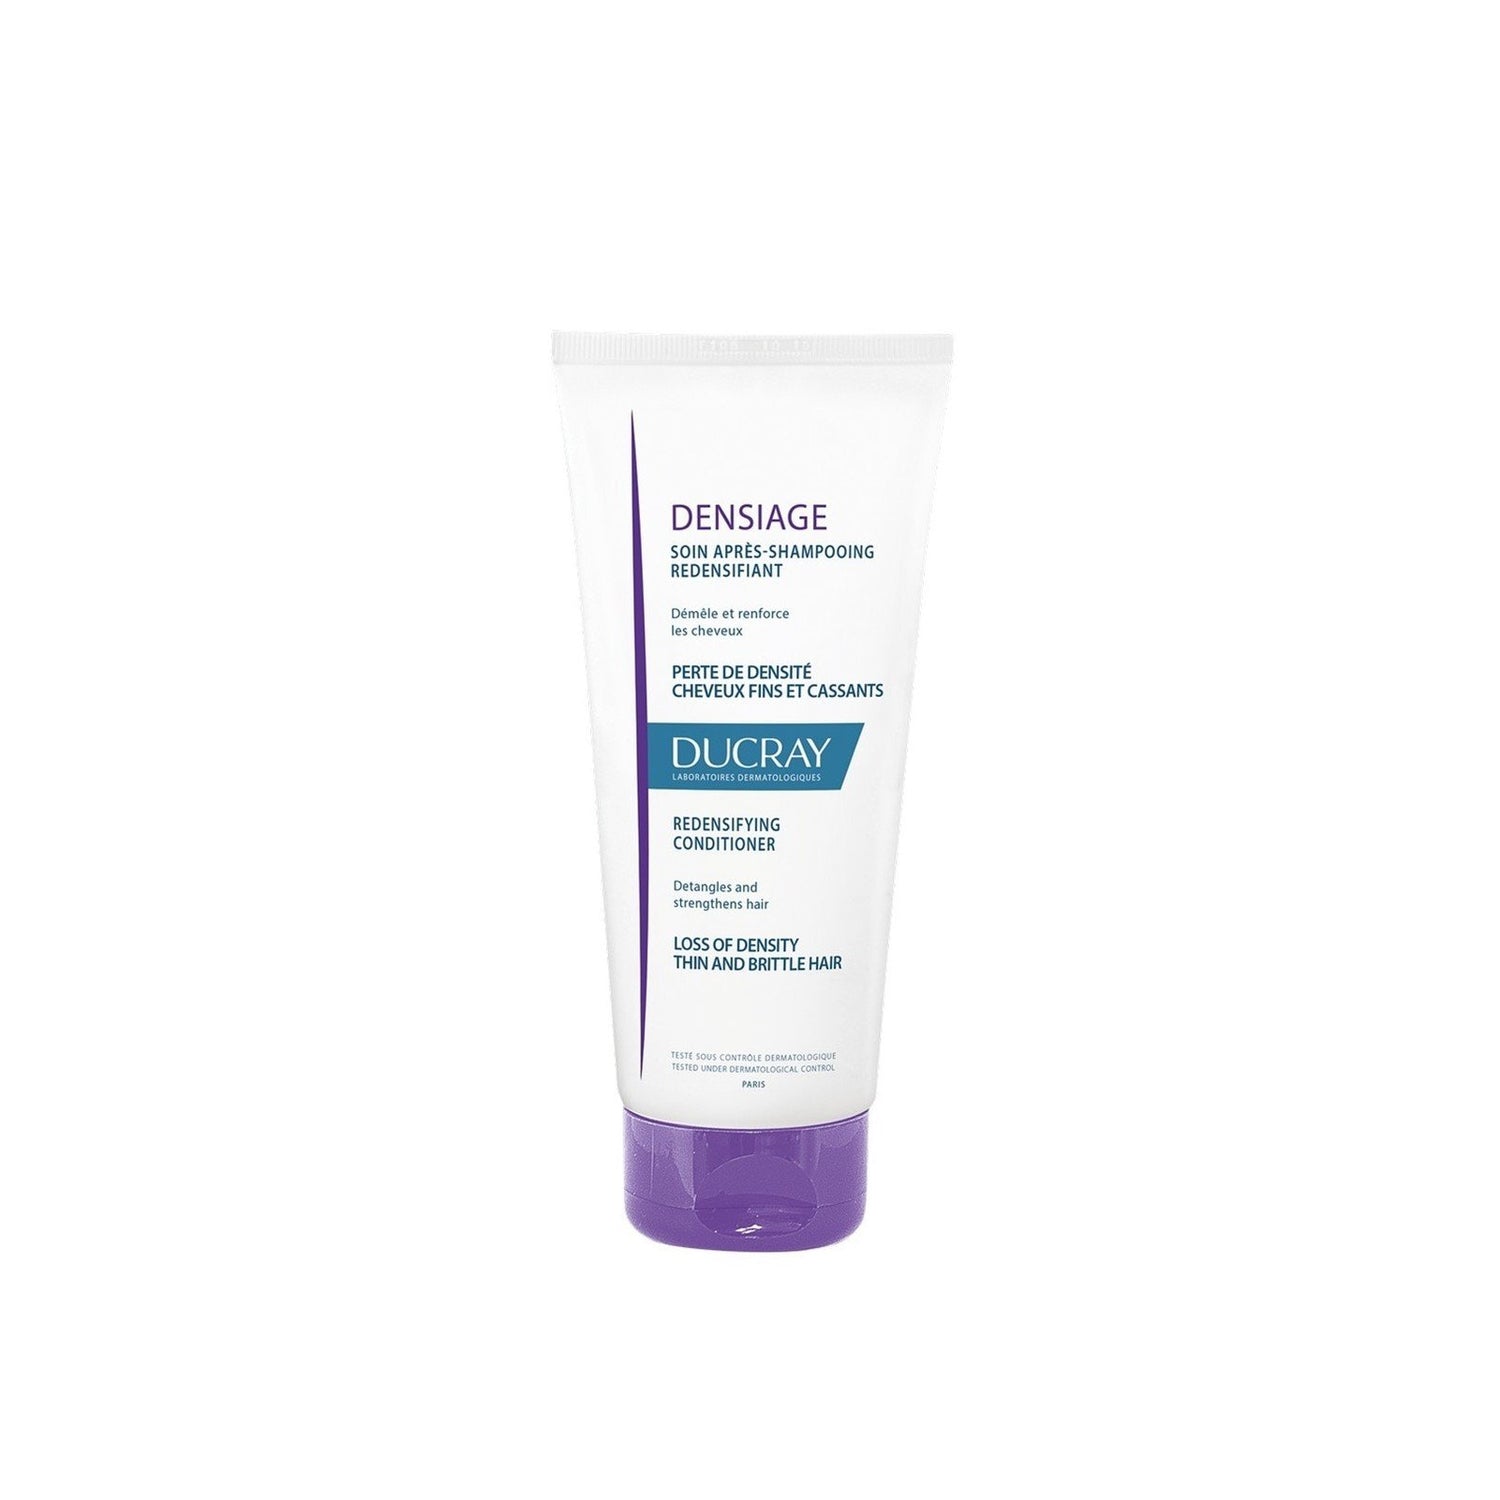 Ducray Densiage Après-Shampooing Redensifiant 200 ml